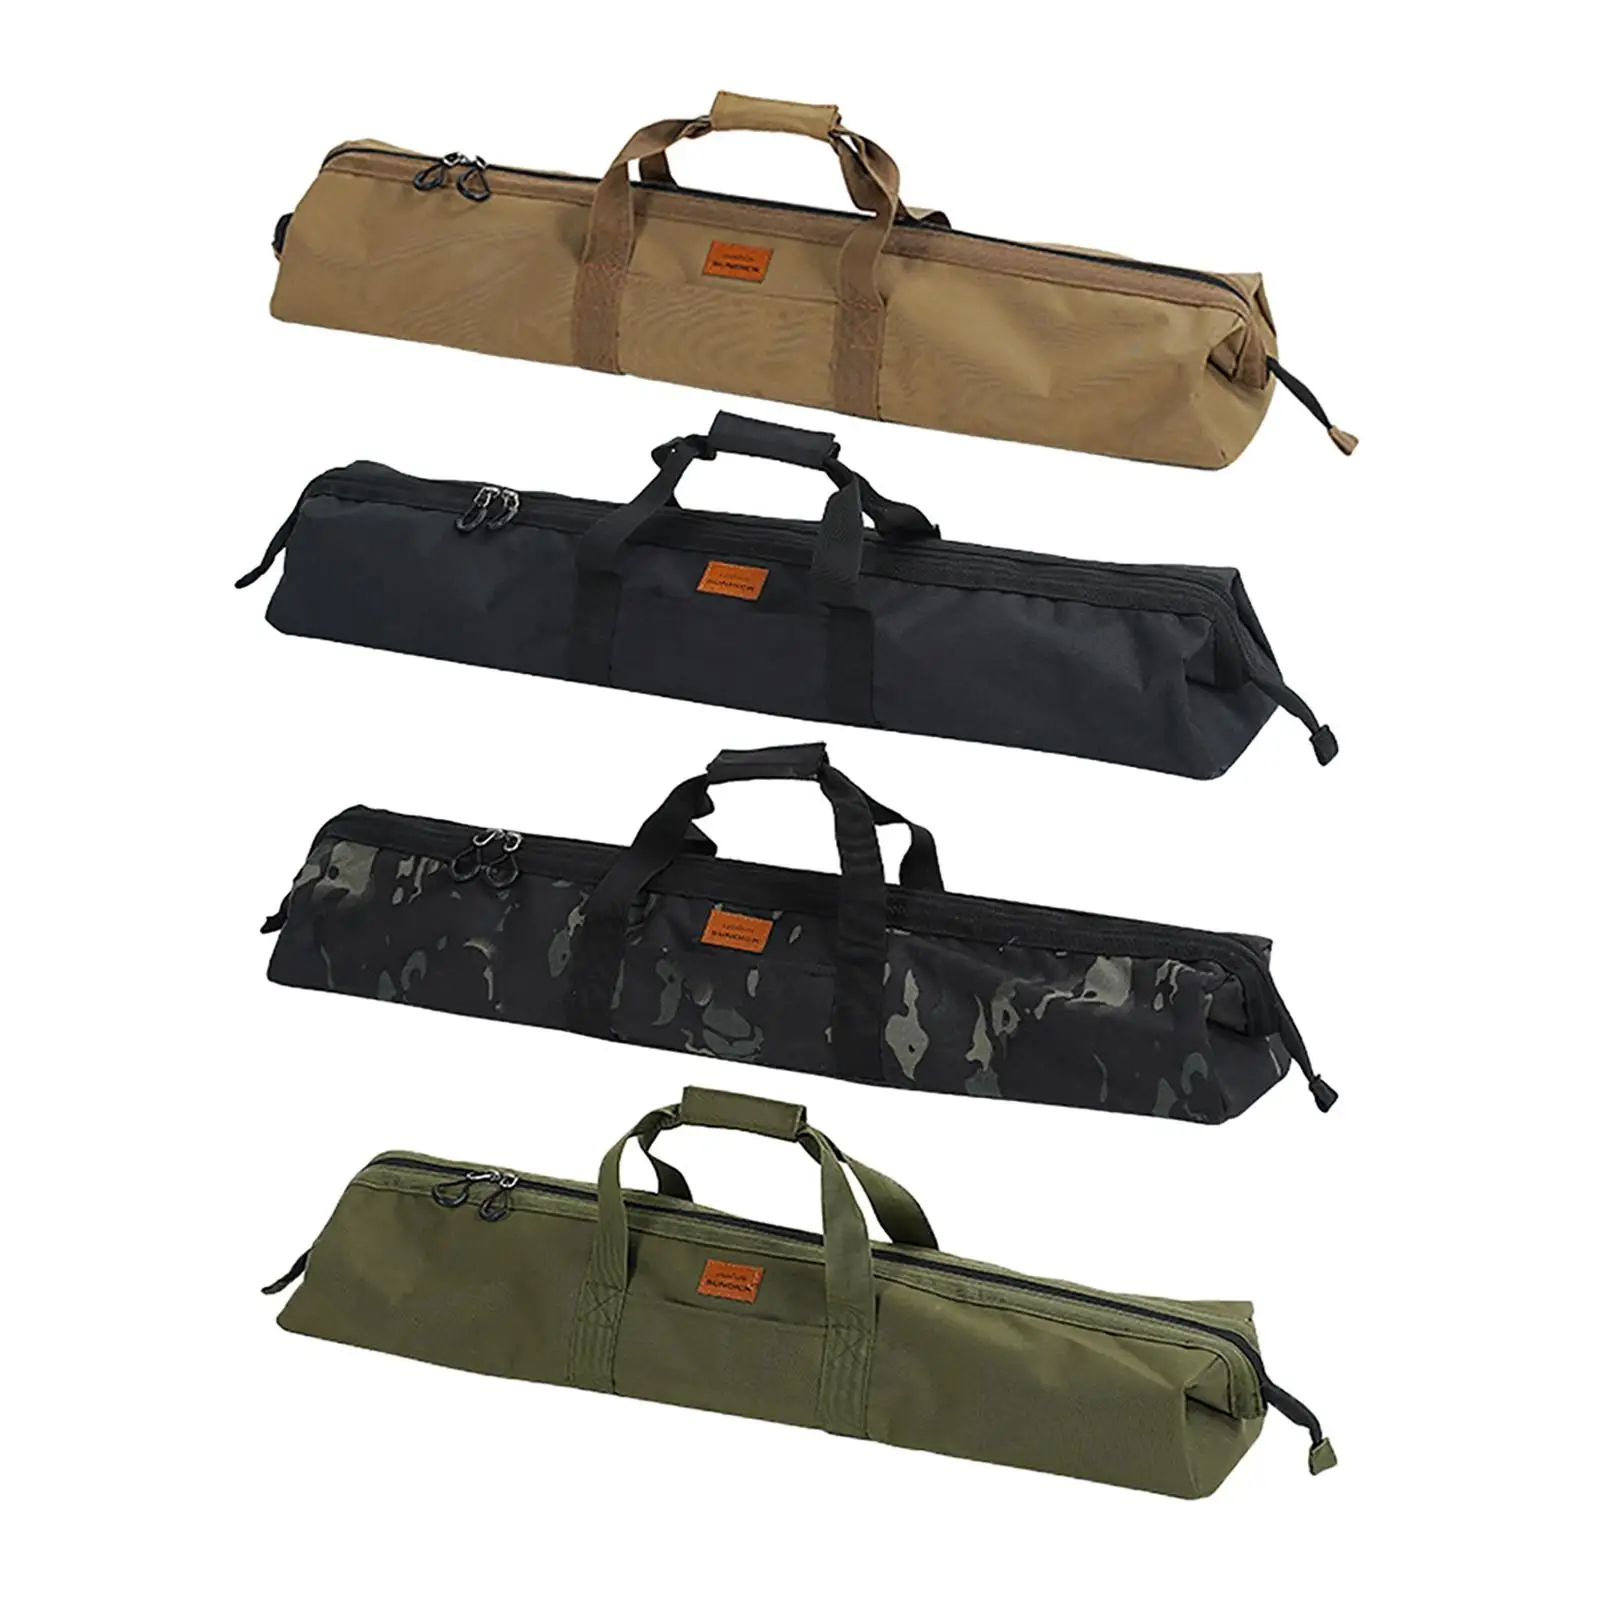 Canopy Pole Storage Bag Wear-Resistant Carrying Case for Camping Accessories